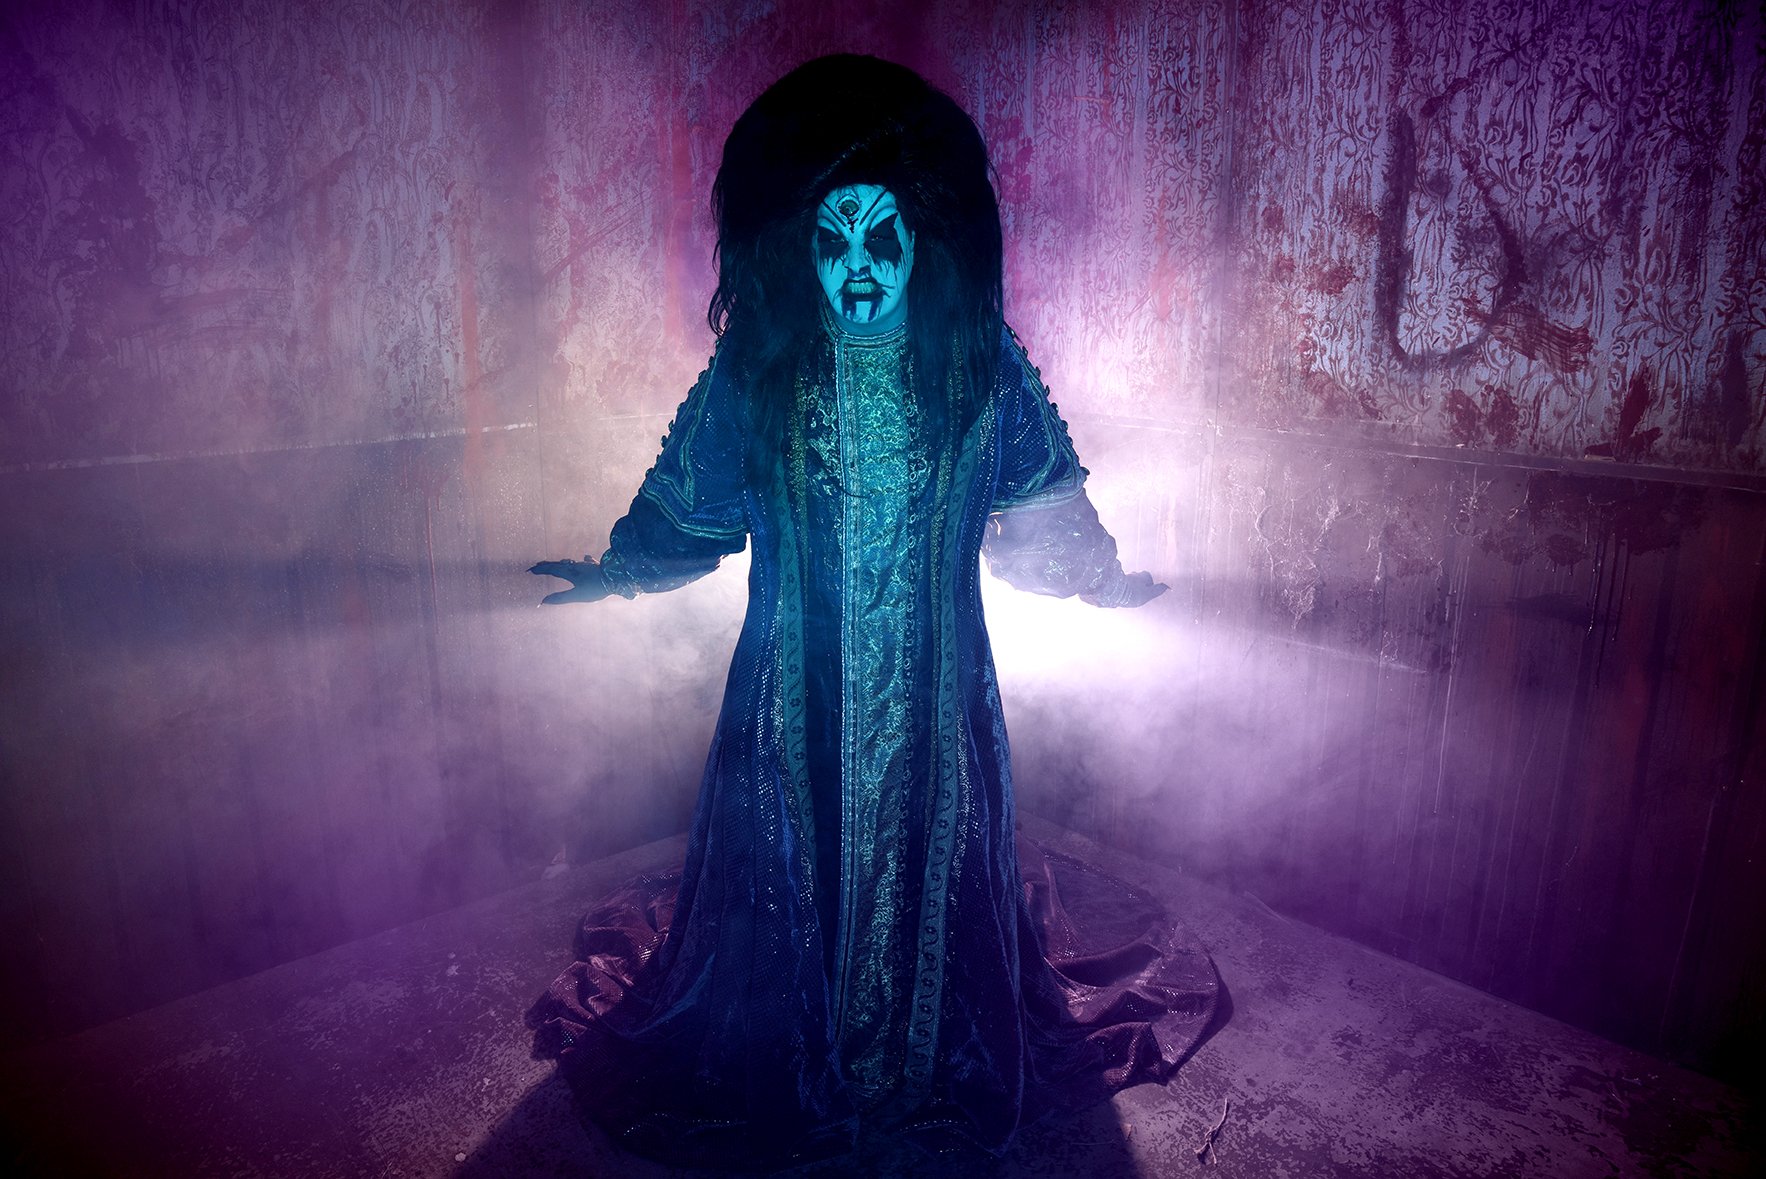 Drag Legend Peaches Christ Brings Back San Francisco’s Scariest Haunted House